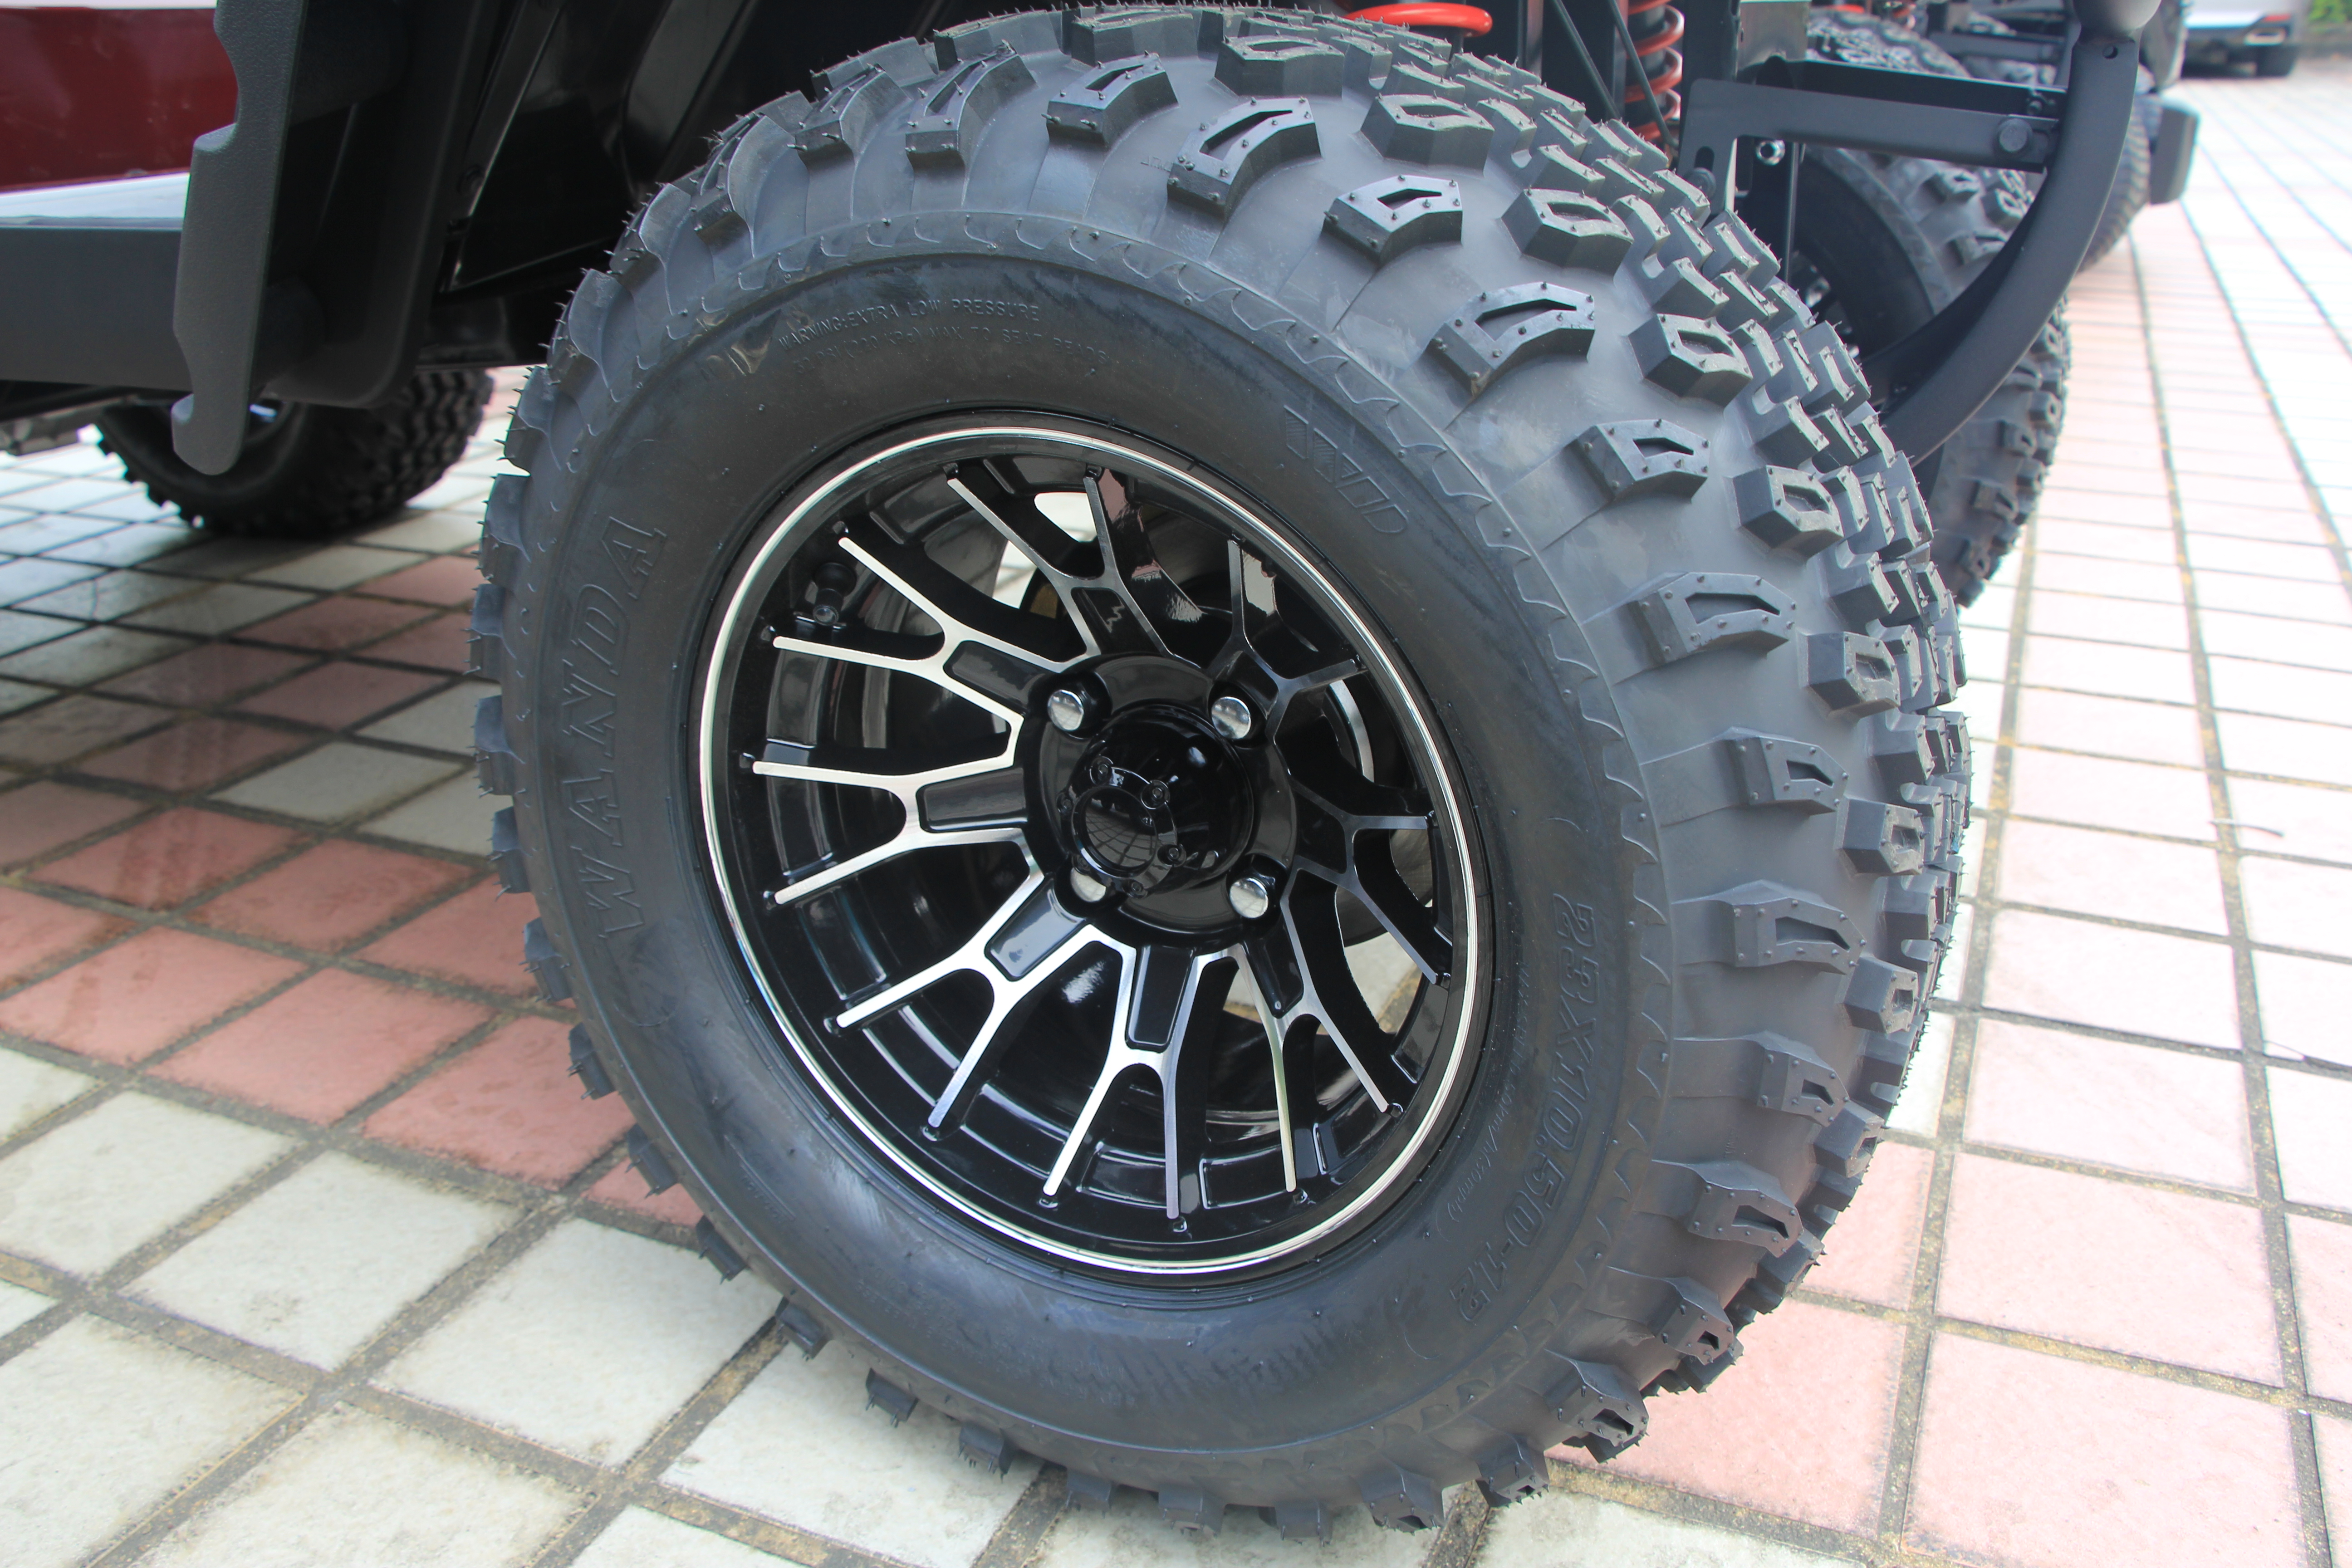 DOT certification; all terrain 23*10.5-12(4 Ply Rated) tire, high quality golf cart rims and tyre, Precise tire control and stable braking are the key to safe driving. Our tyres offer excellent traction and cushioning to ensure confidence in every drive.